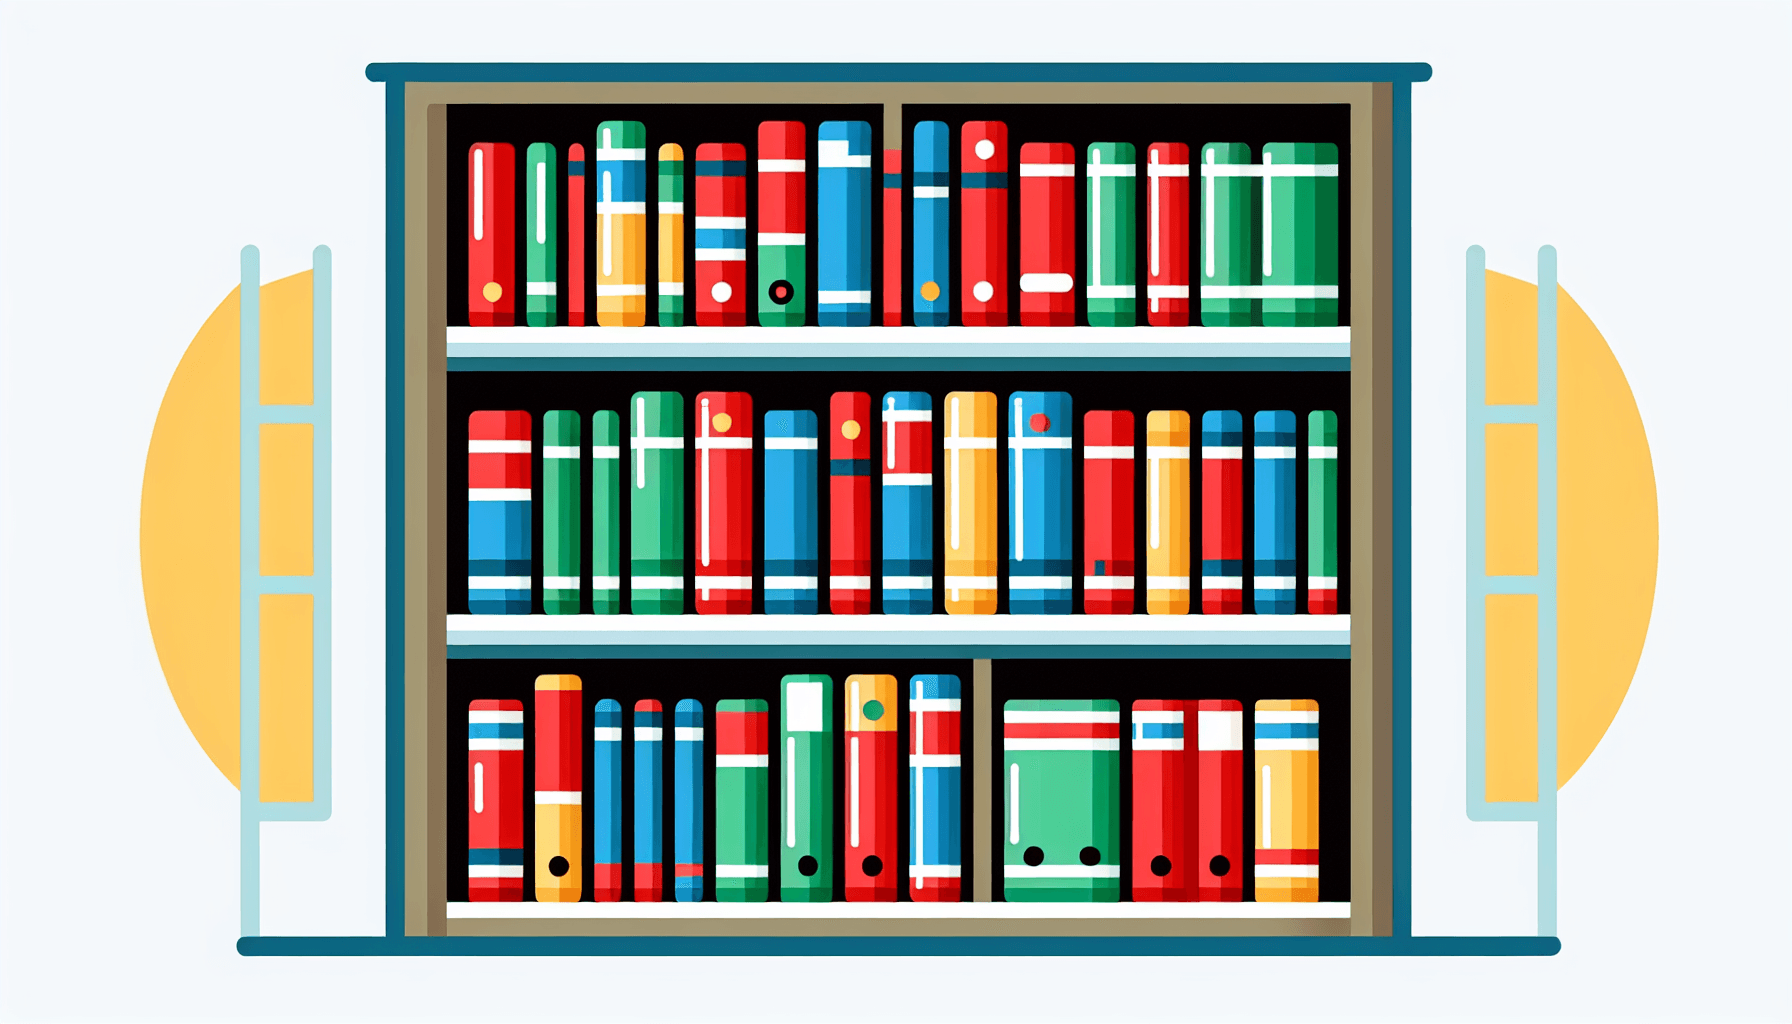 Bookshelf in flat illustration style and white background, red #f47574, green #88c7a8, yellow #fcc44b, and blue #645bc8 colors.